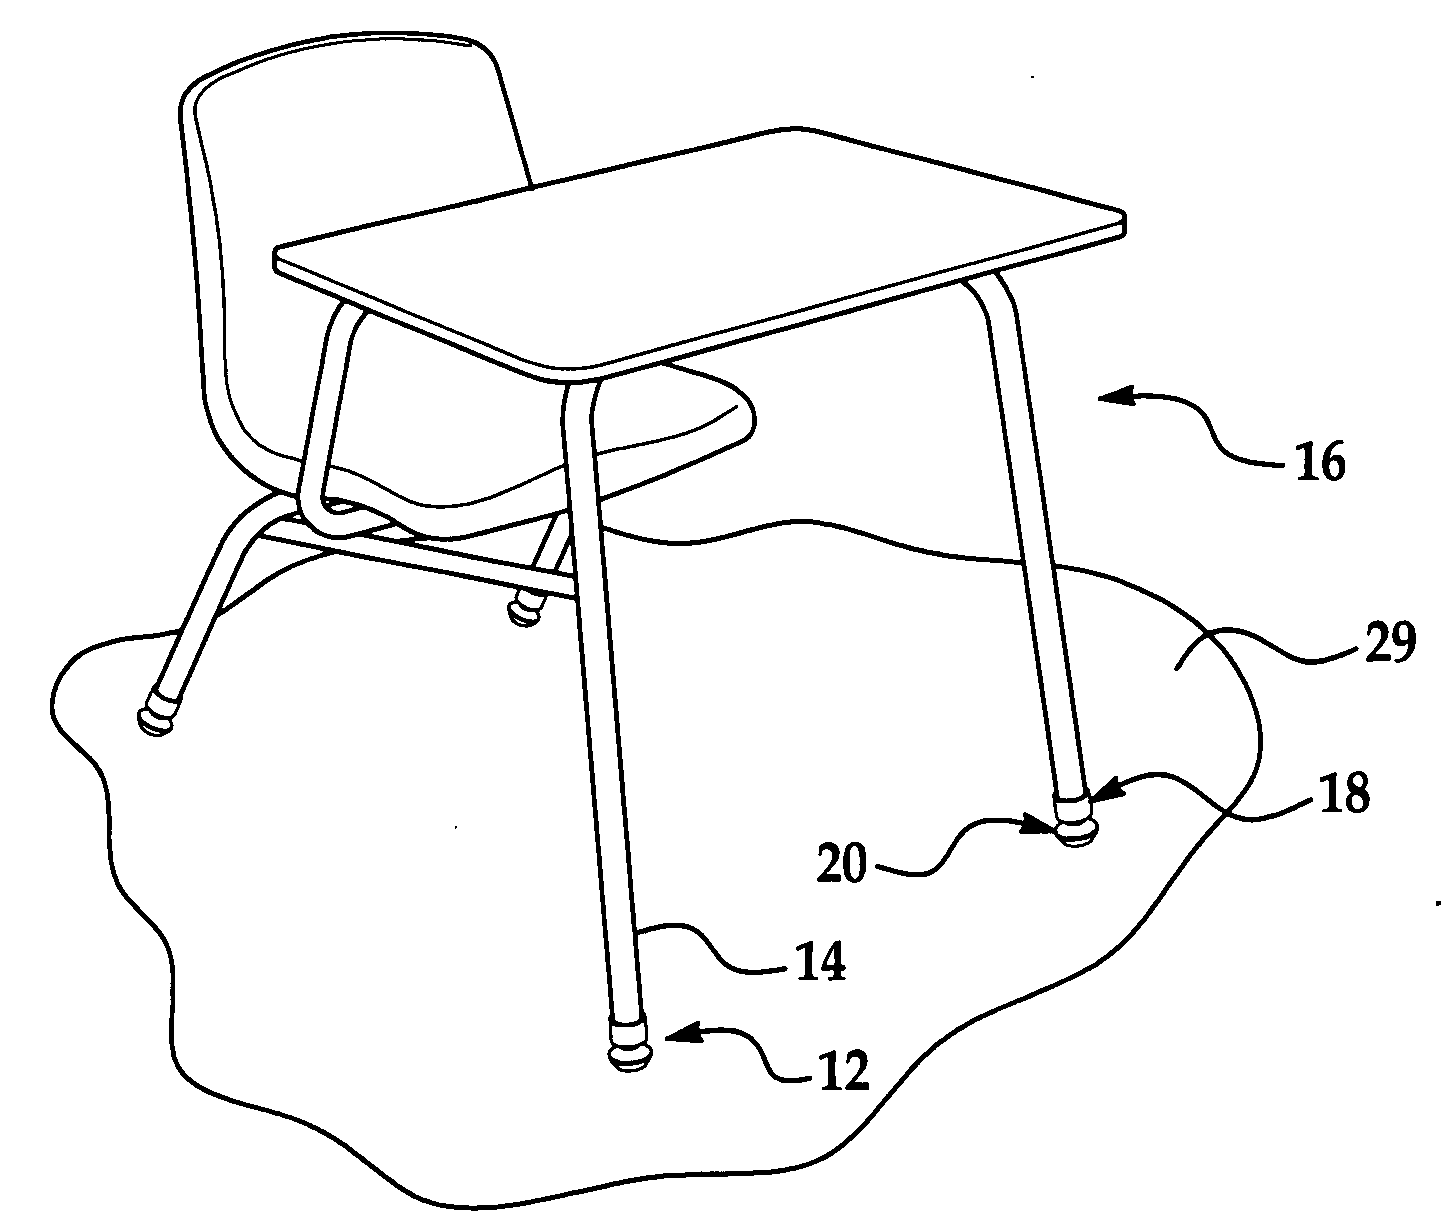 Furniture-glide assembly